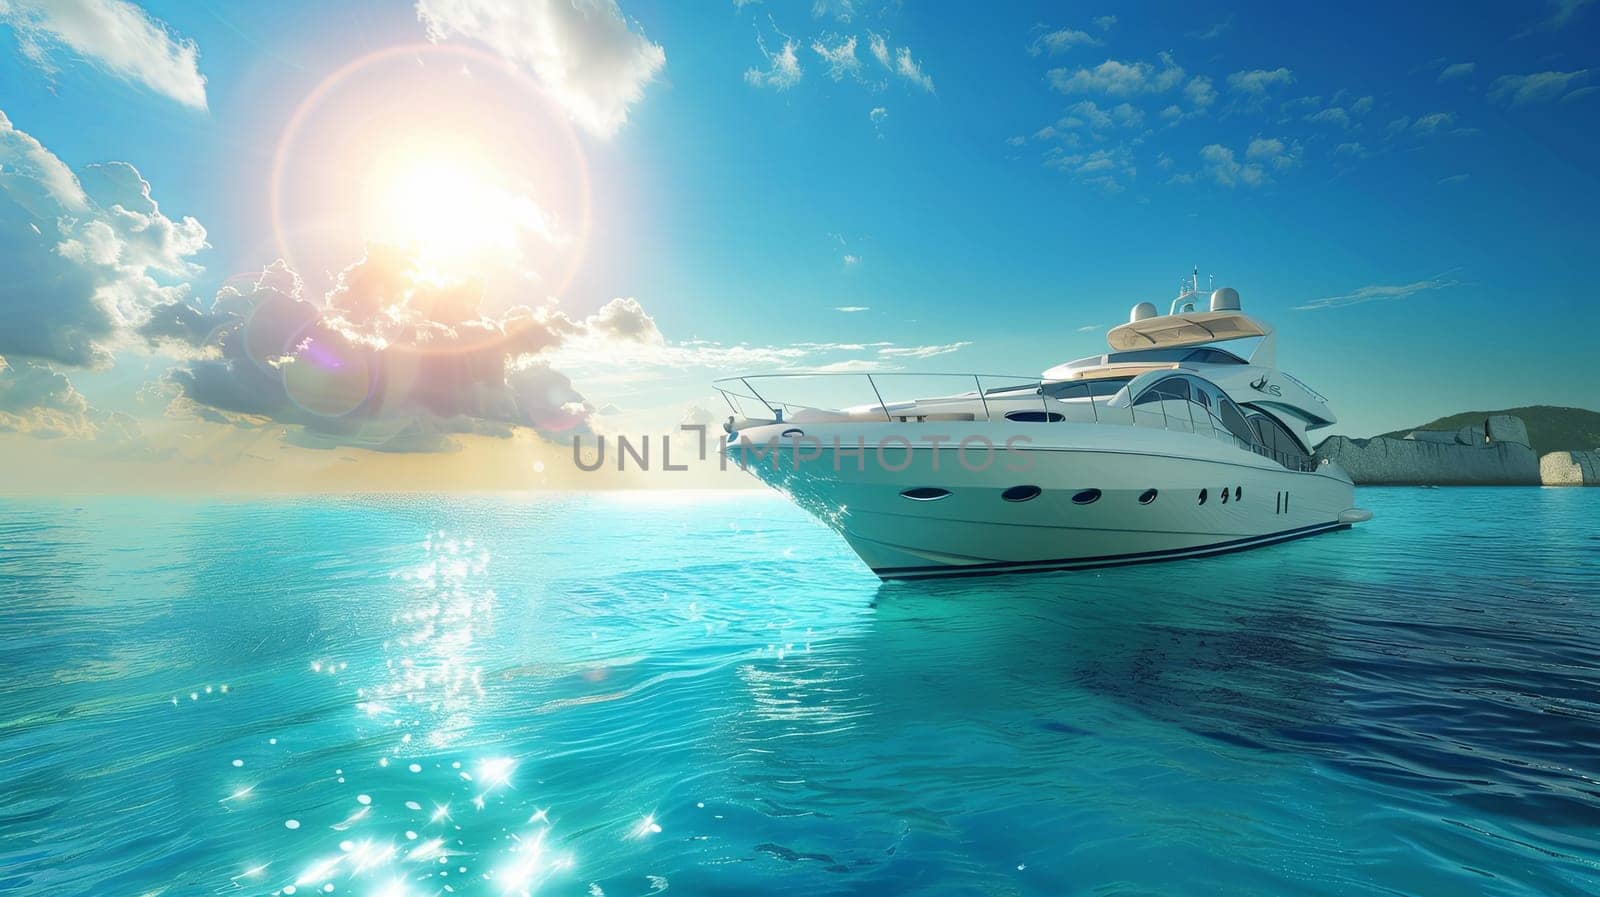 A luxurious white yacht peacefully floats on a tranquil lagoon, surrounded by palm trees and serenity.